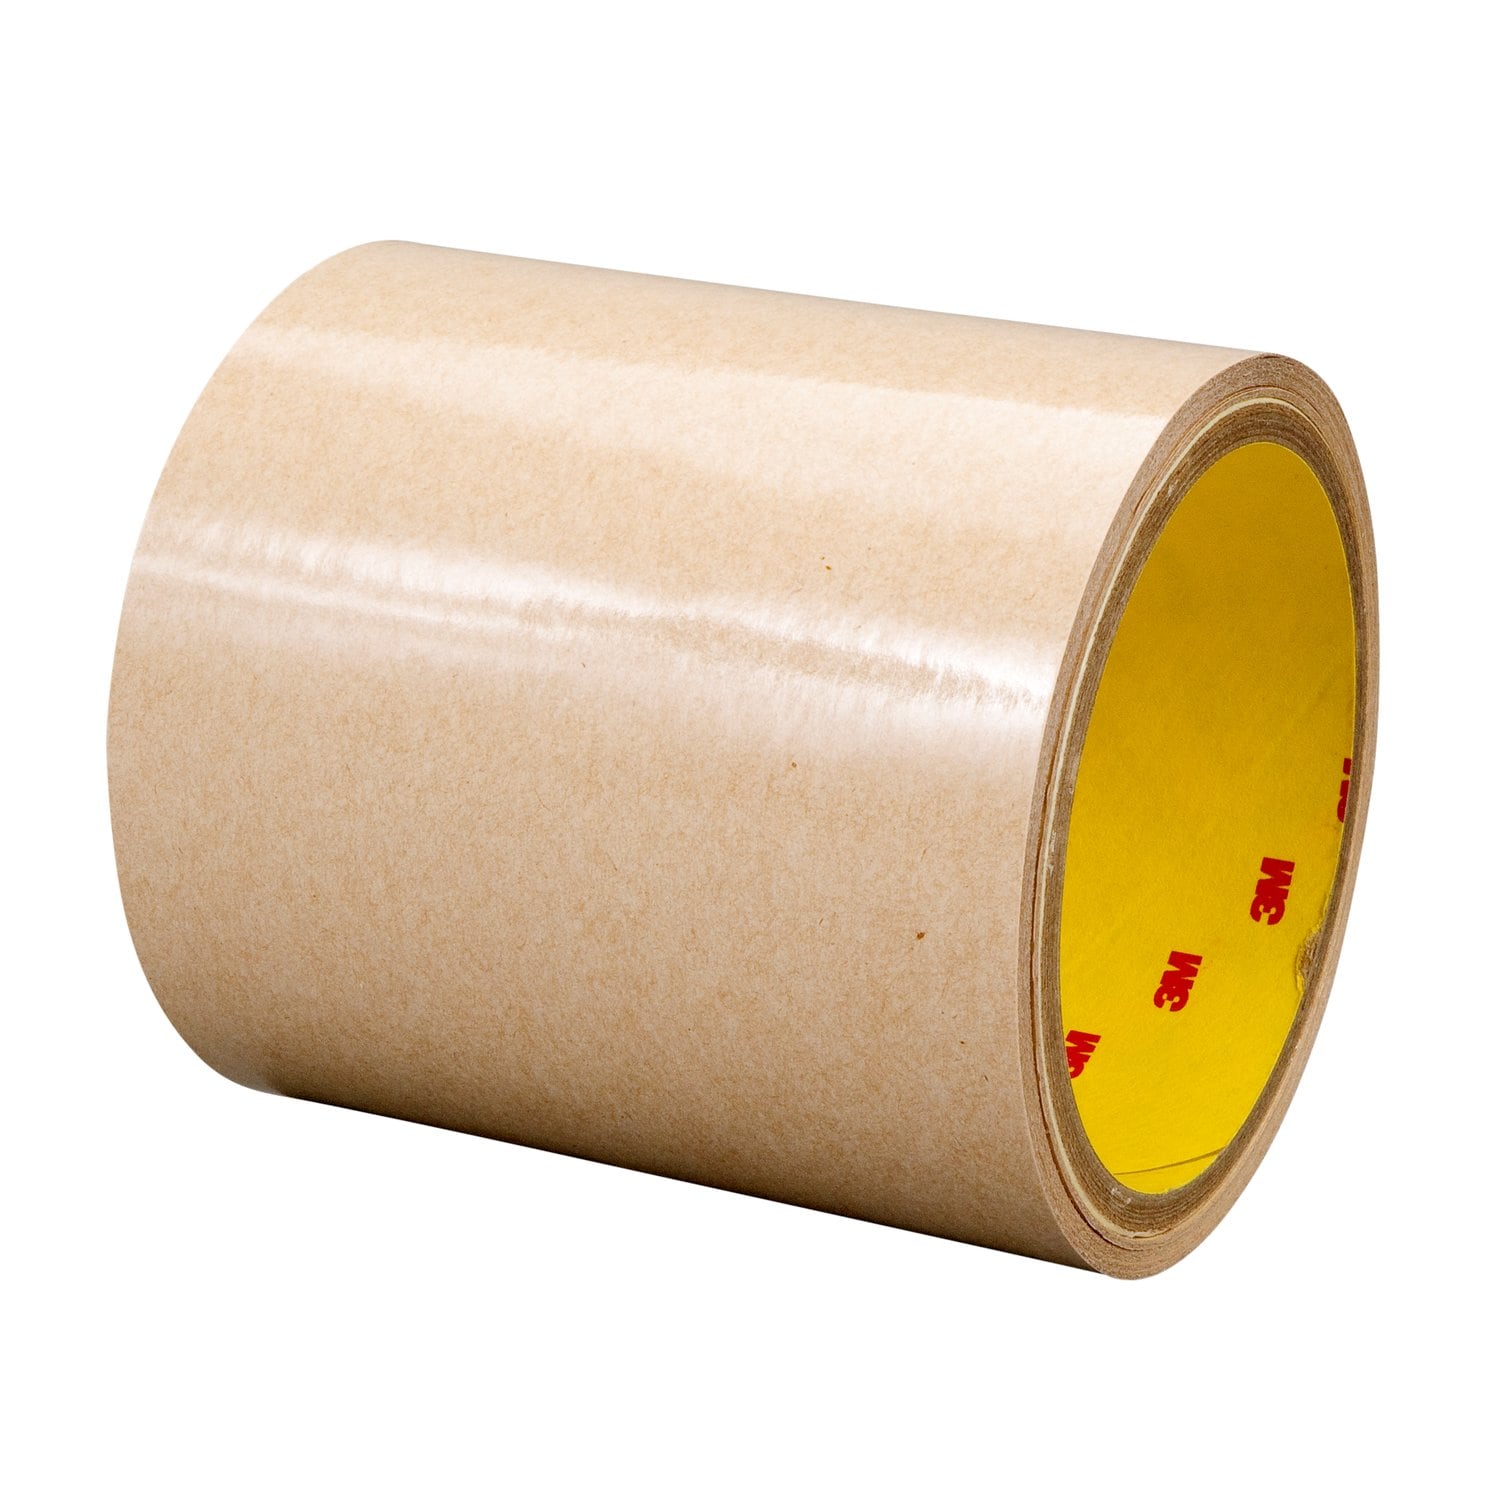 Foam Roll - Non-Perforated, 1/16, 72 x 1,250' S-1099 - Uline